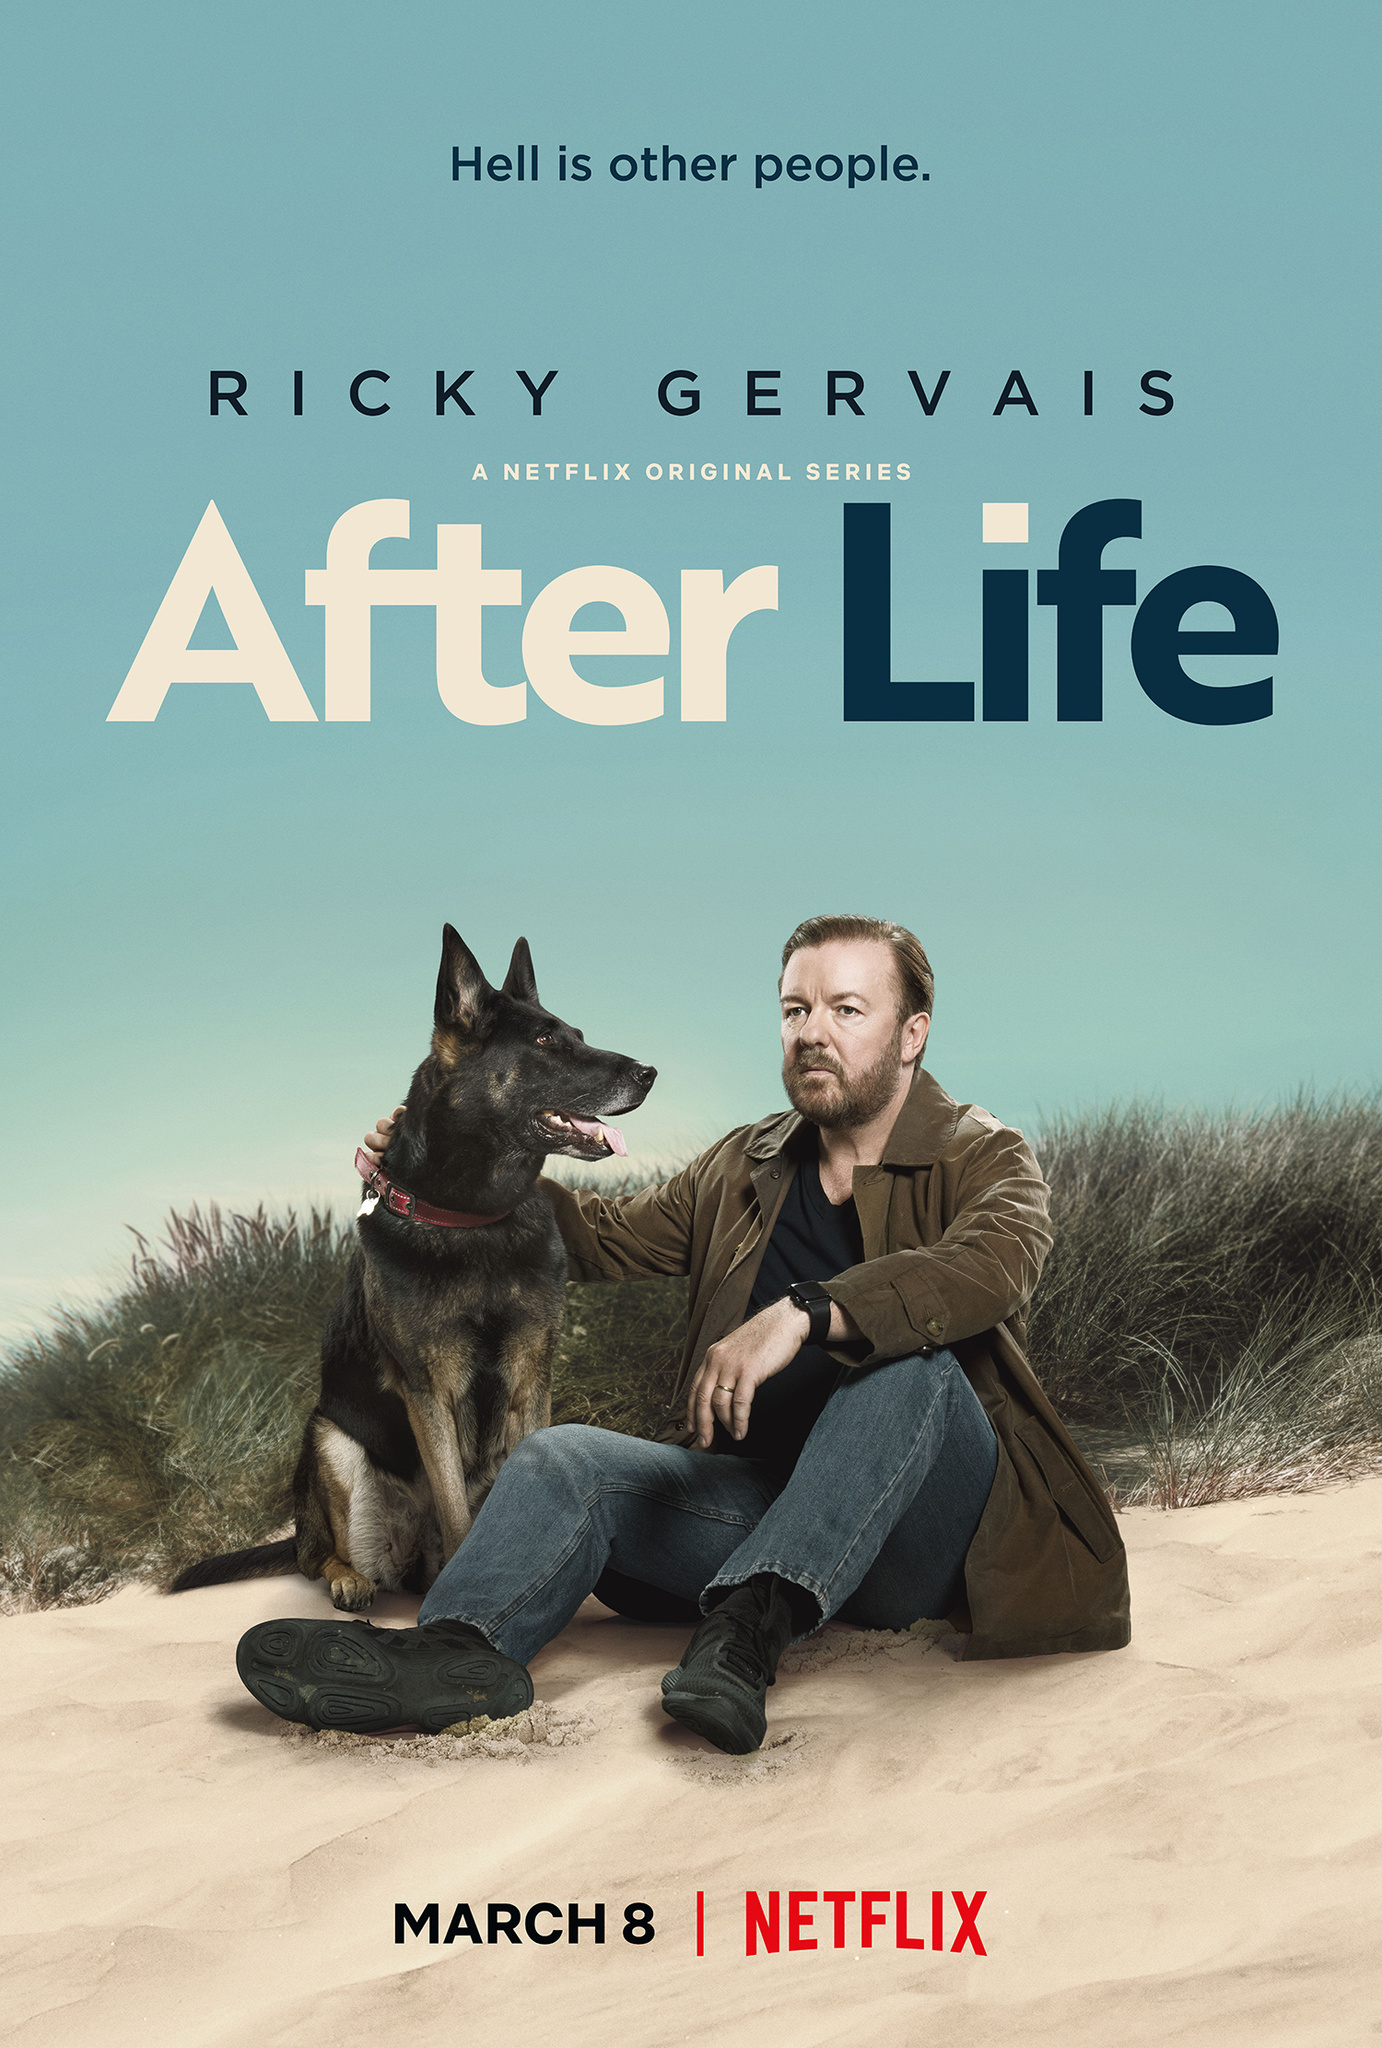 ricky gervais afterlife